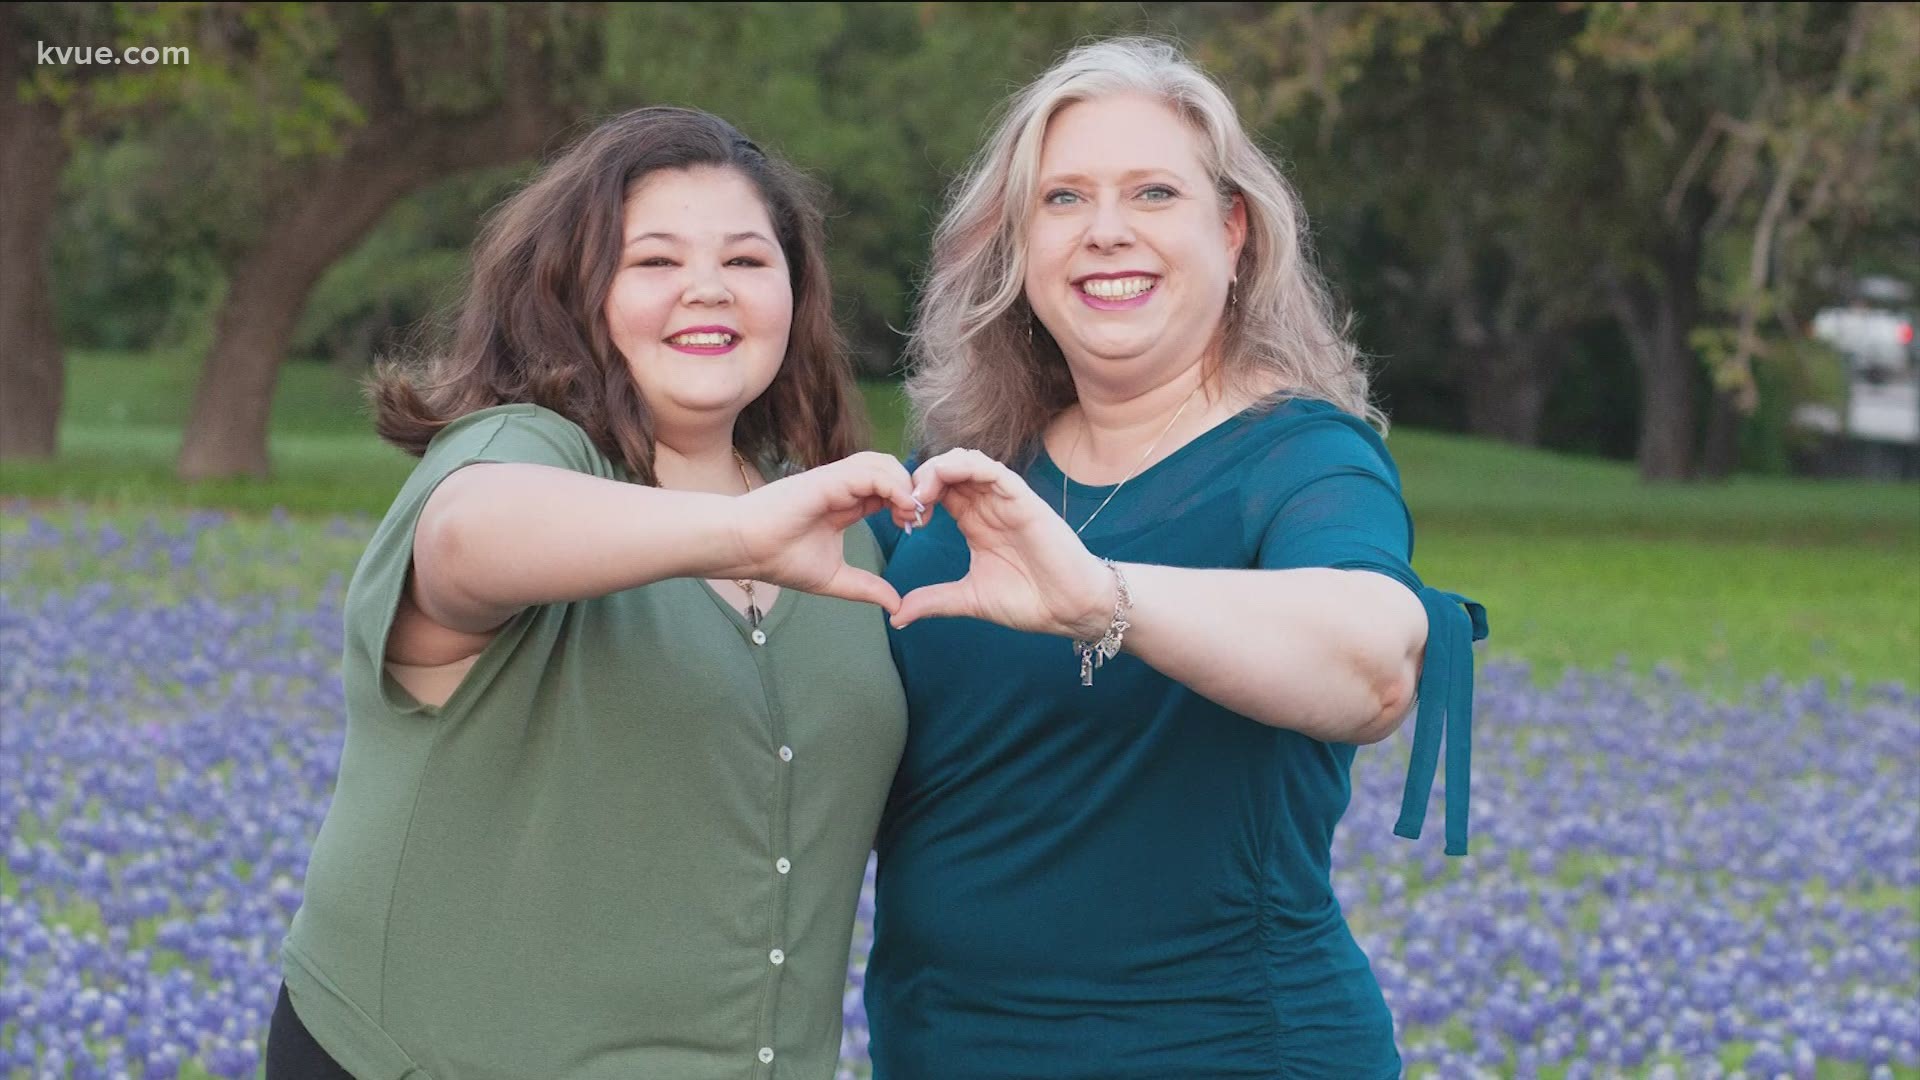 For Jennifer and Maddy, a Central Texas mother-daughter due, June 10 is a very special day. KVUE's Tori Larned shows us why.